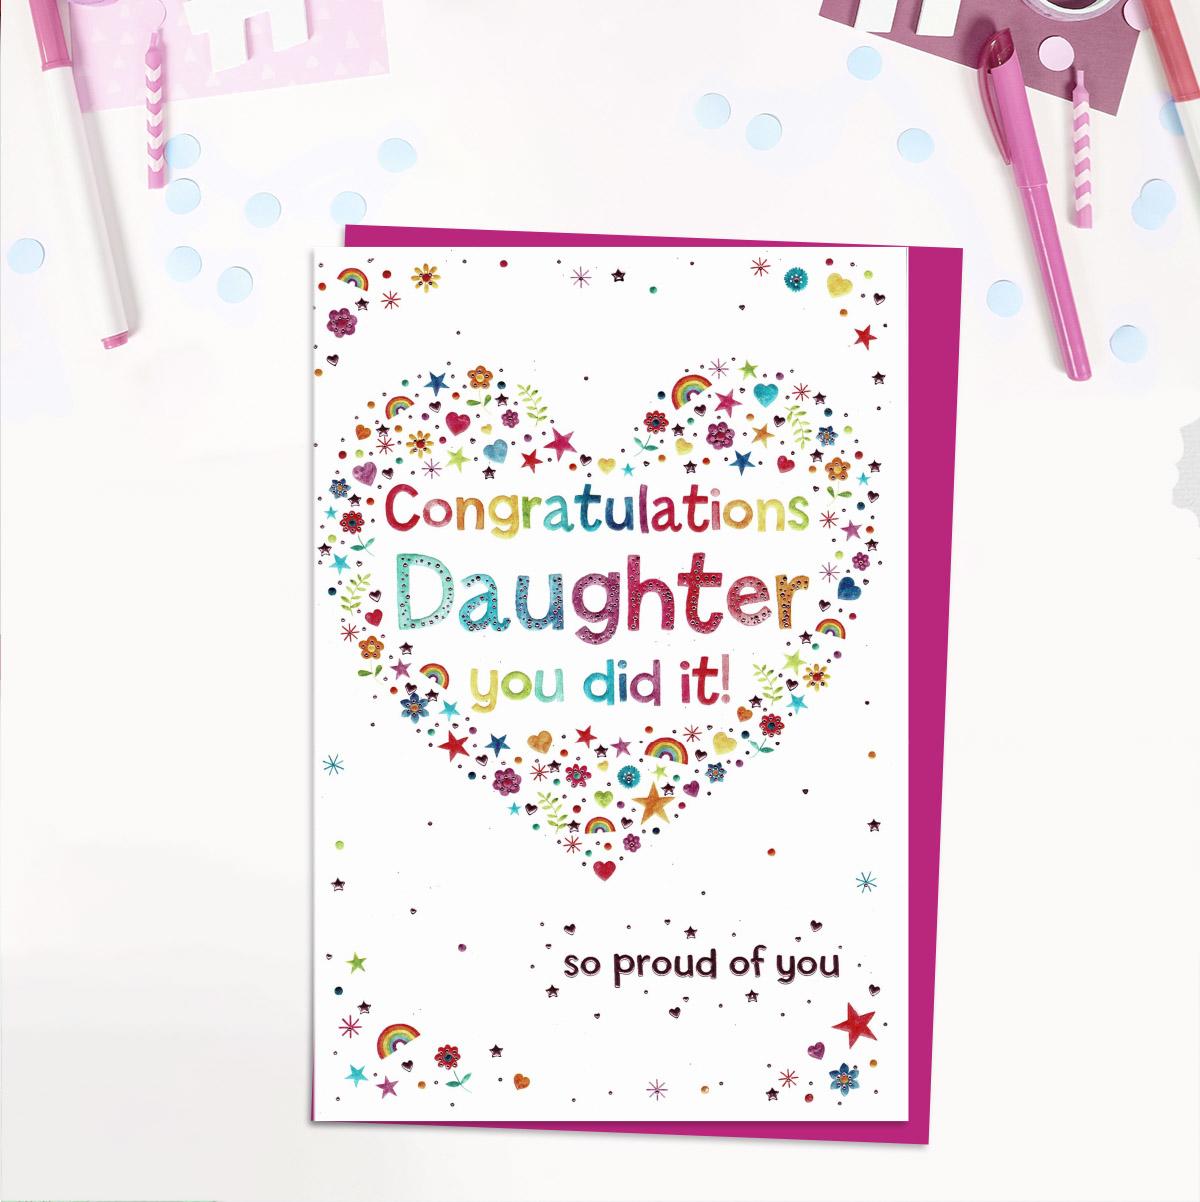 Congratulations Daughter You Did It! Card Front Image